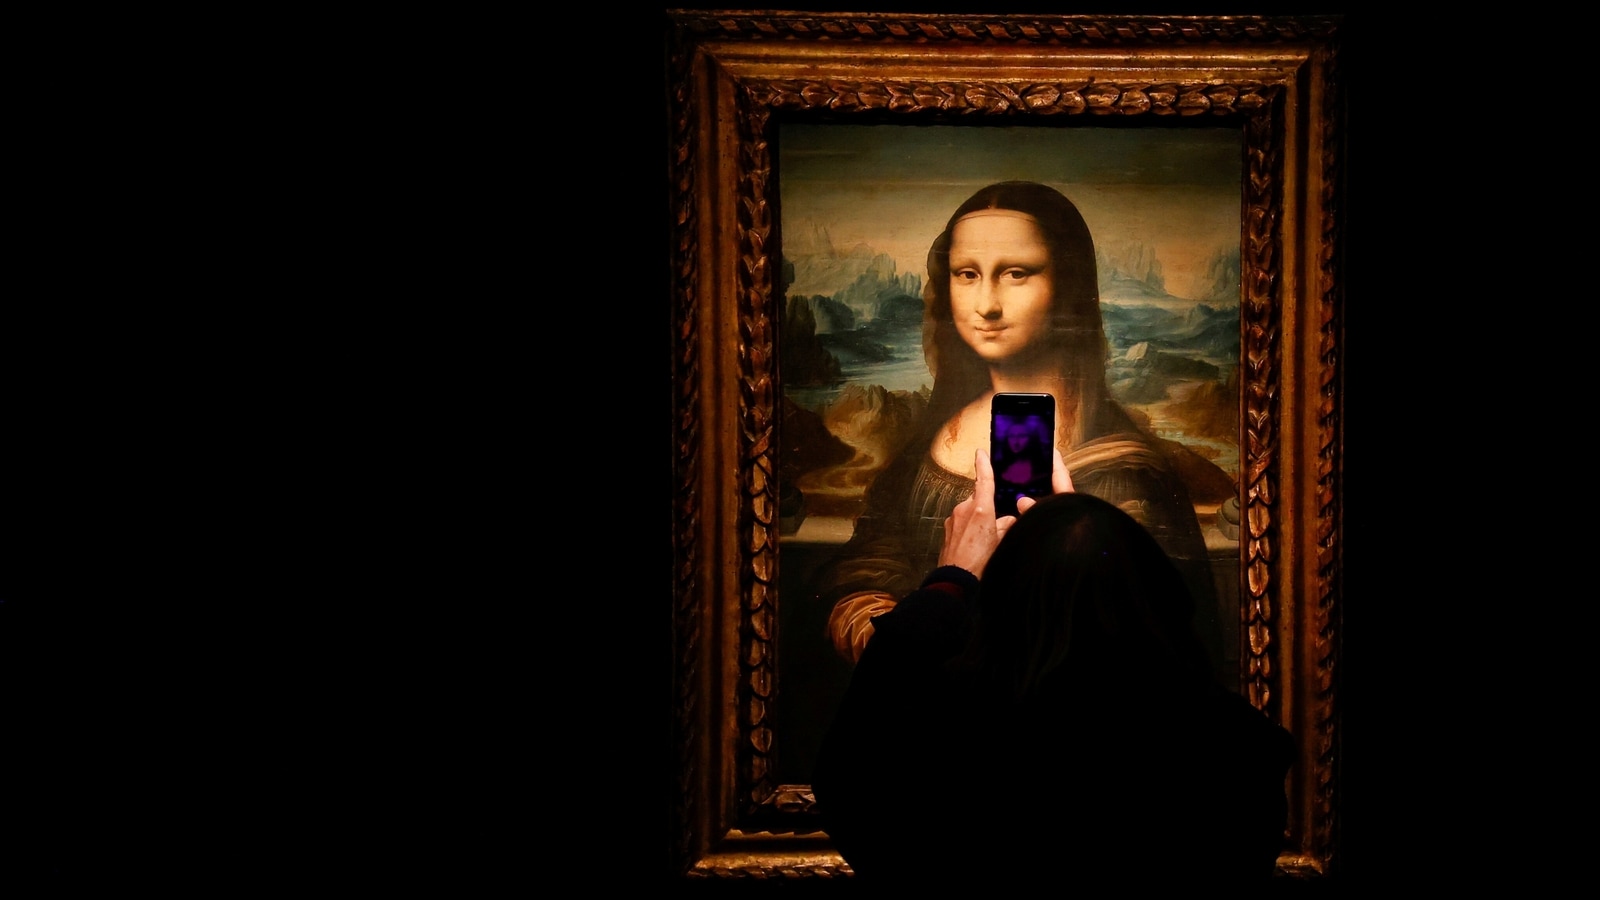 Mona Lisa copy from 1600 sells for USD 242,634 in Paris auction